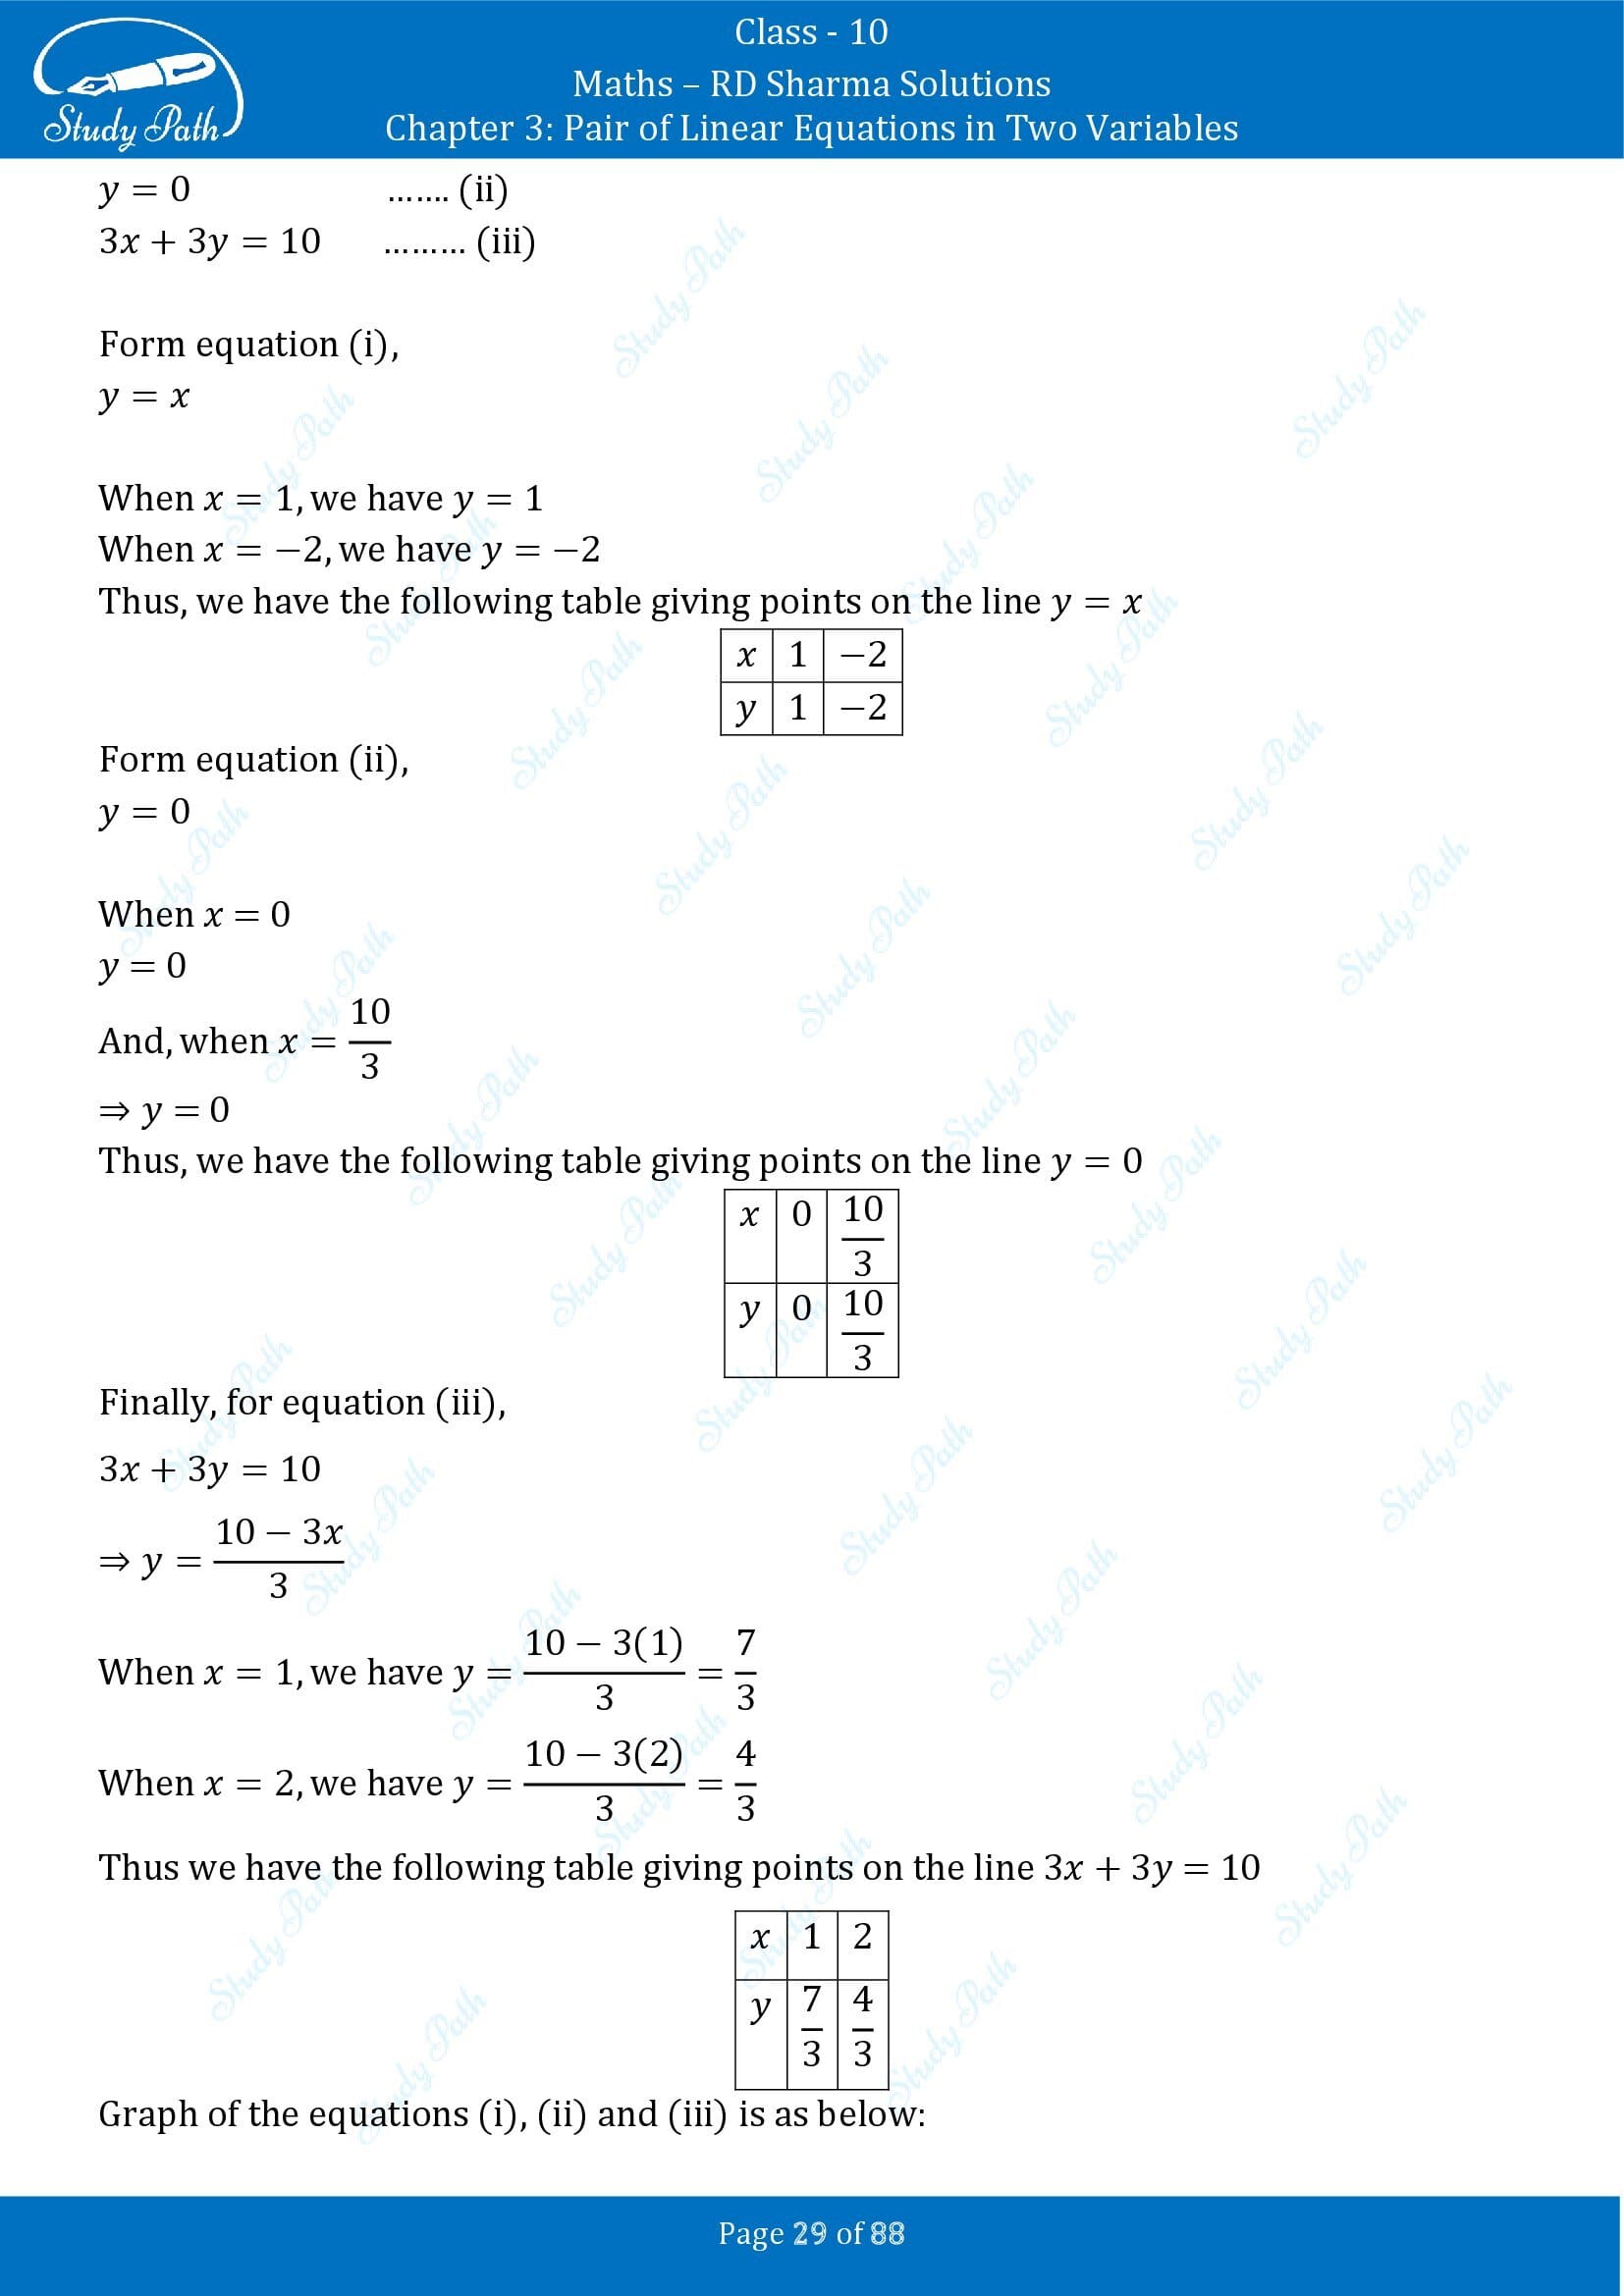 RD Sharma Solutions Class 10 Chapter 3 Pair of Linear Equations in Two Variables Exercise 3.2 00029